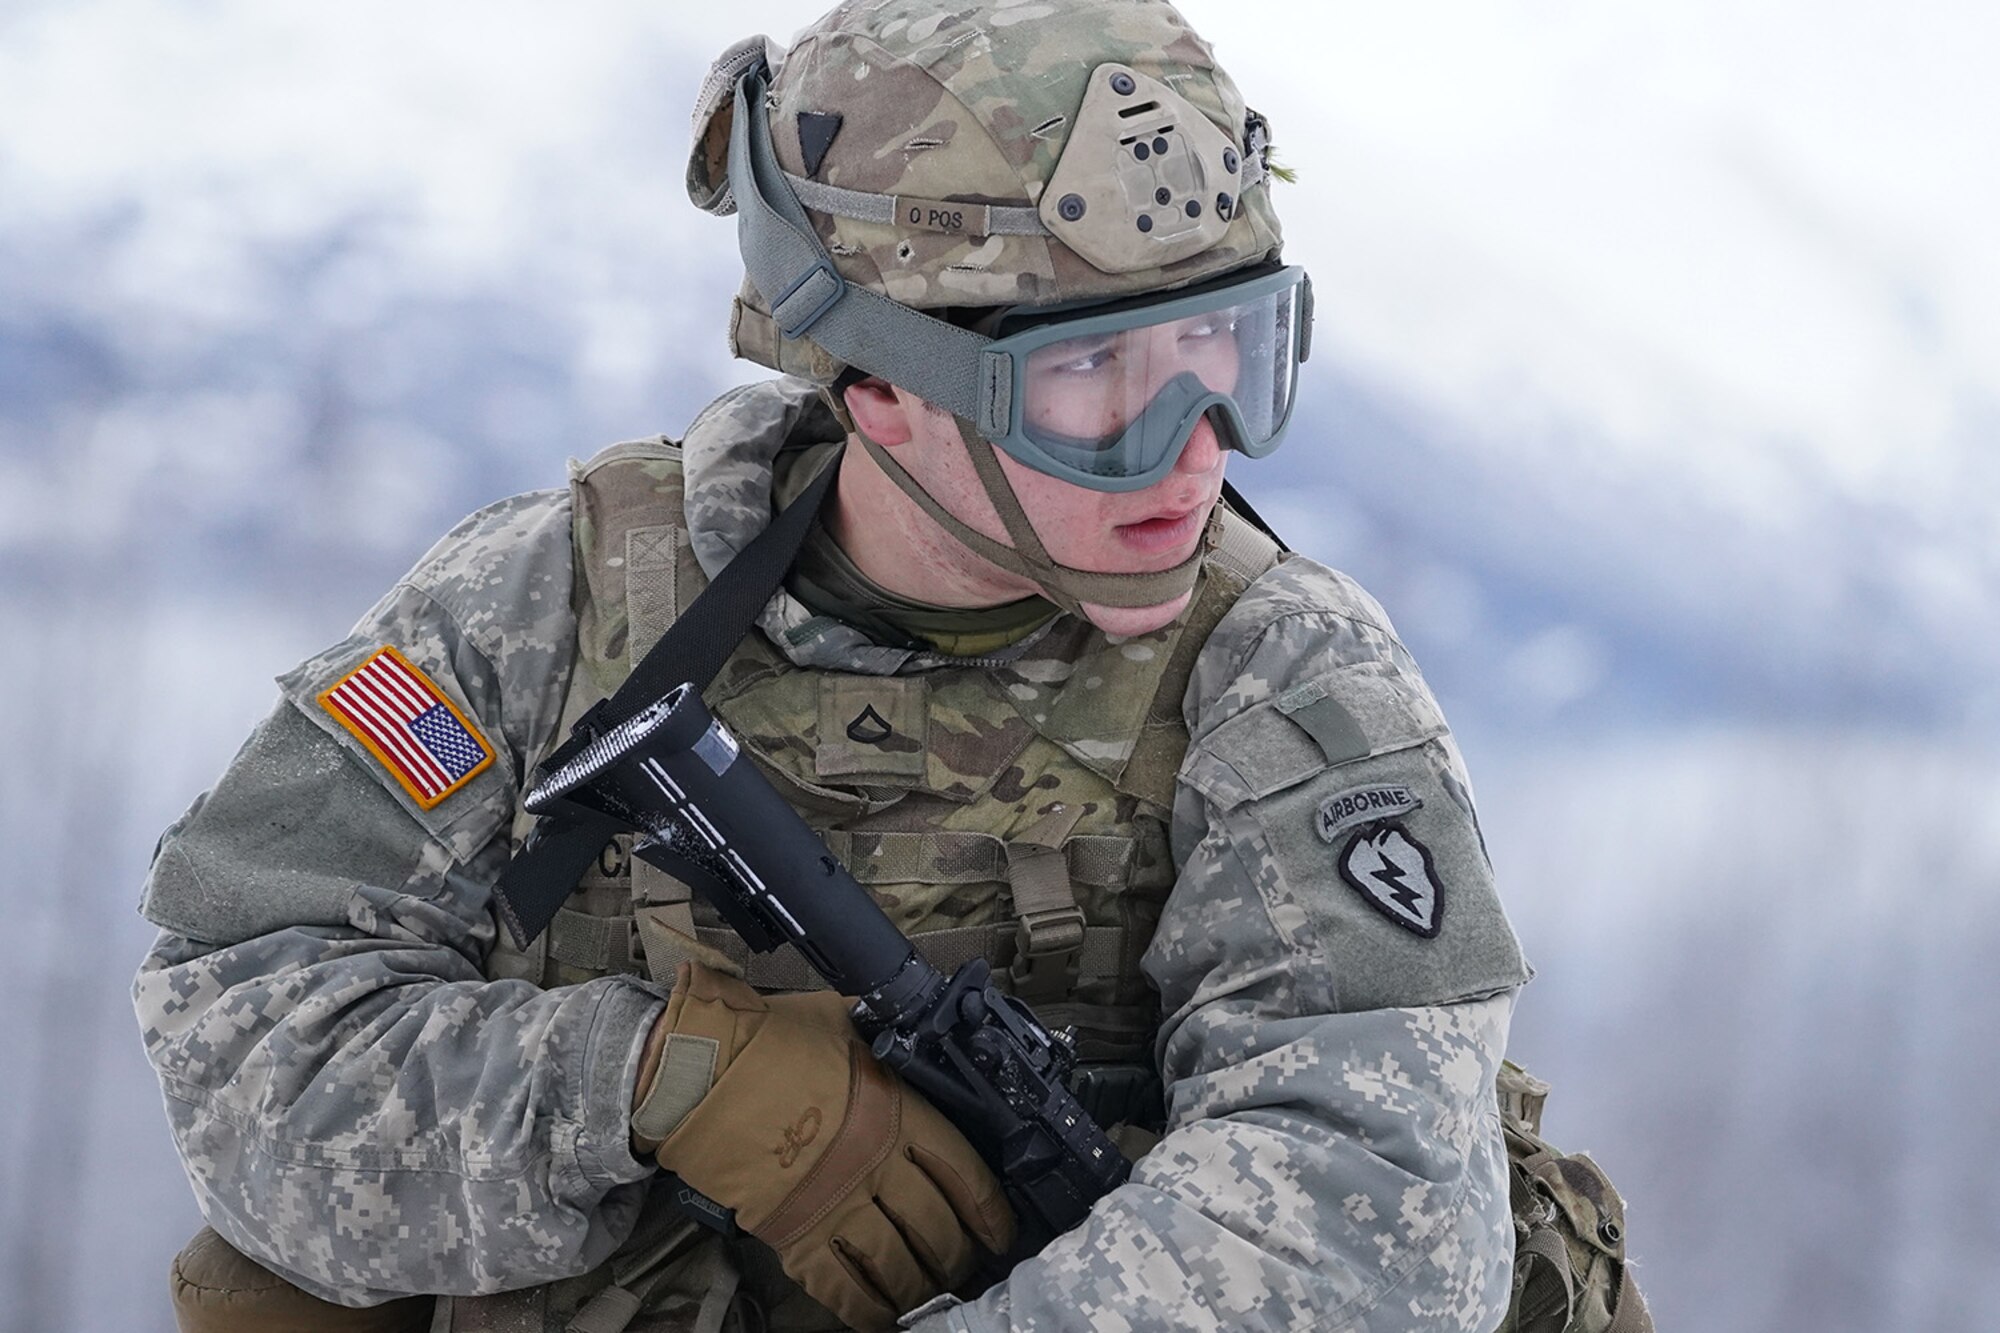 Army Pfc. Alexander Carrasco assigned to Headquarters and Headquarters Company, 6th Brigade Engineer Battalion (Airborne), 4th Infantry Brigade Combat Team (Airborne), 25th Infantry Division, U.S. Army Alaska, waits at an extraction point while training with aviators from the Alaska Army National Guard at Neibhur Drop Zone, Nov. 26, 2019, to hone their life-saving and Medevac hoist skills for the paratroopers’ upcoming rotation to the Joint Readiness Training Center at Fort Polk, La.